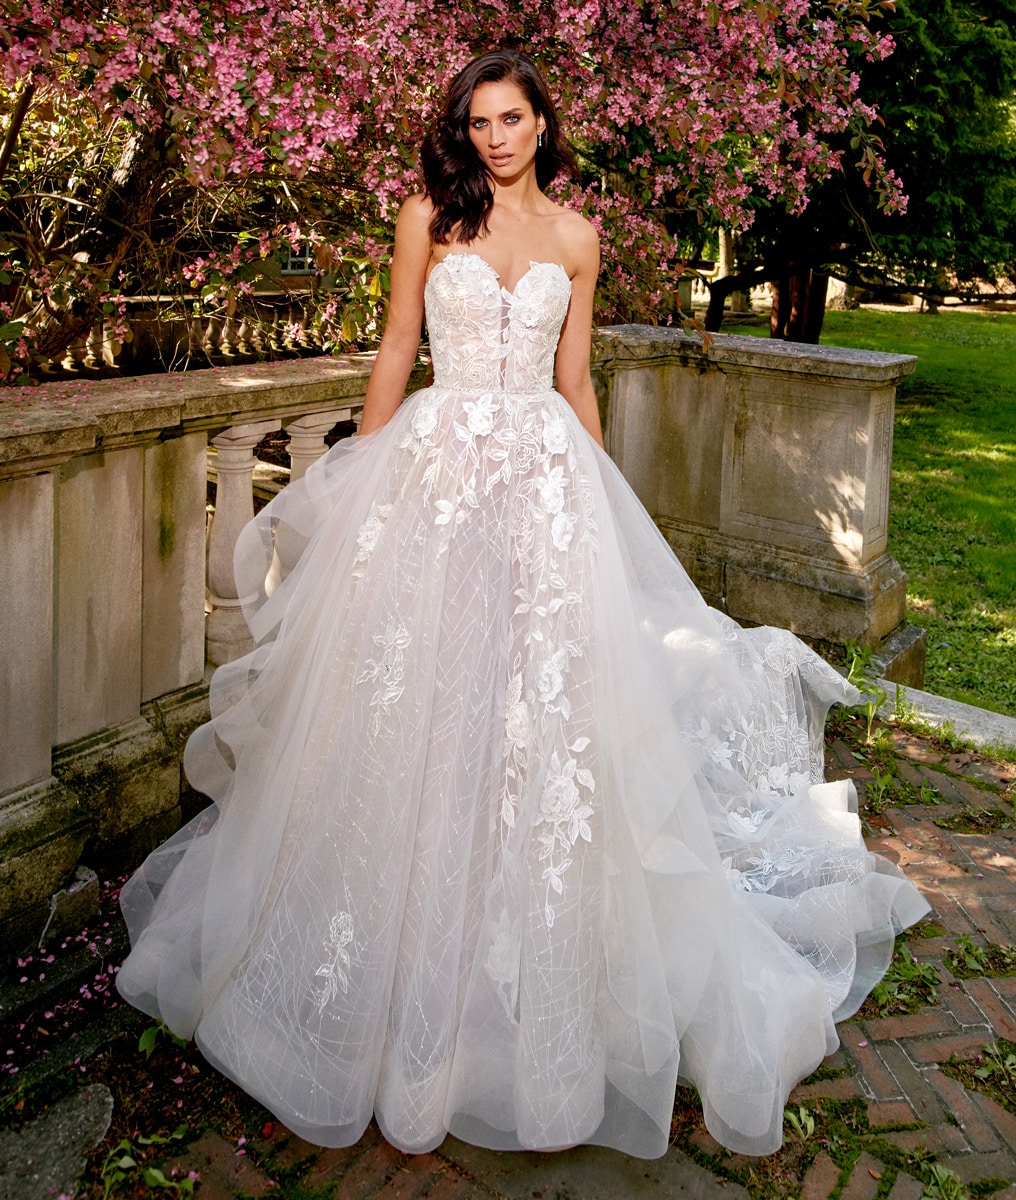 Eve of Milady by Eve Muscio Couture Wedding Dress Collection | Bridal ...